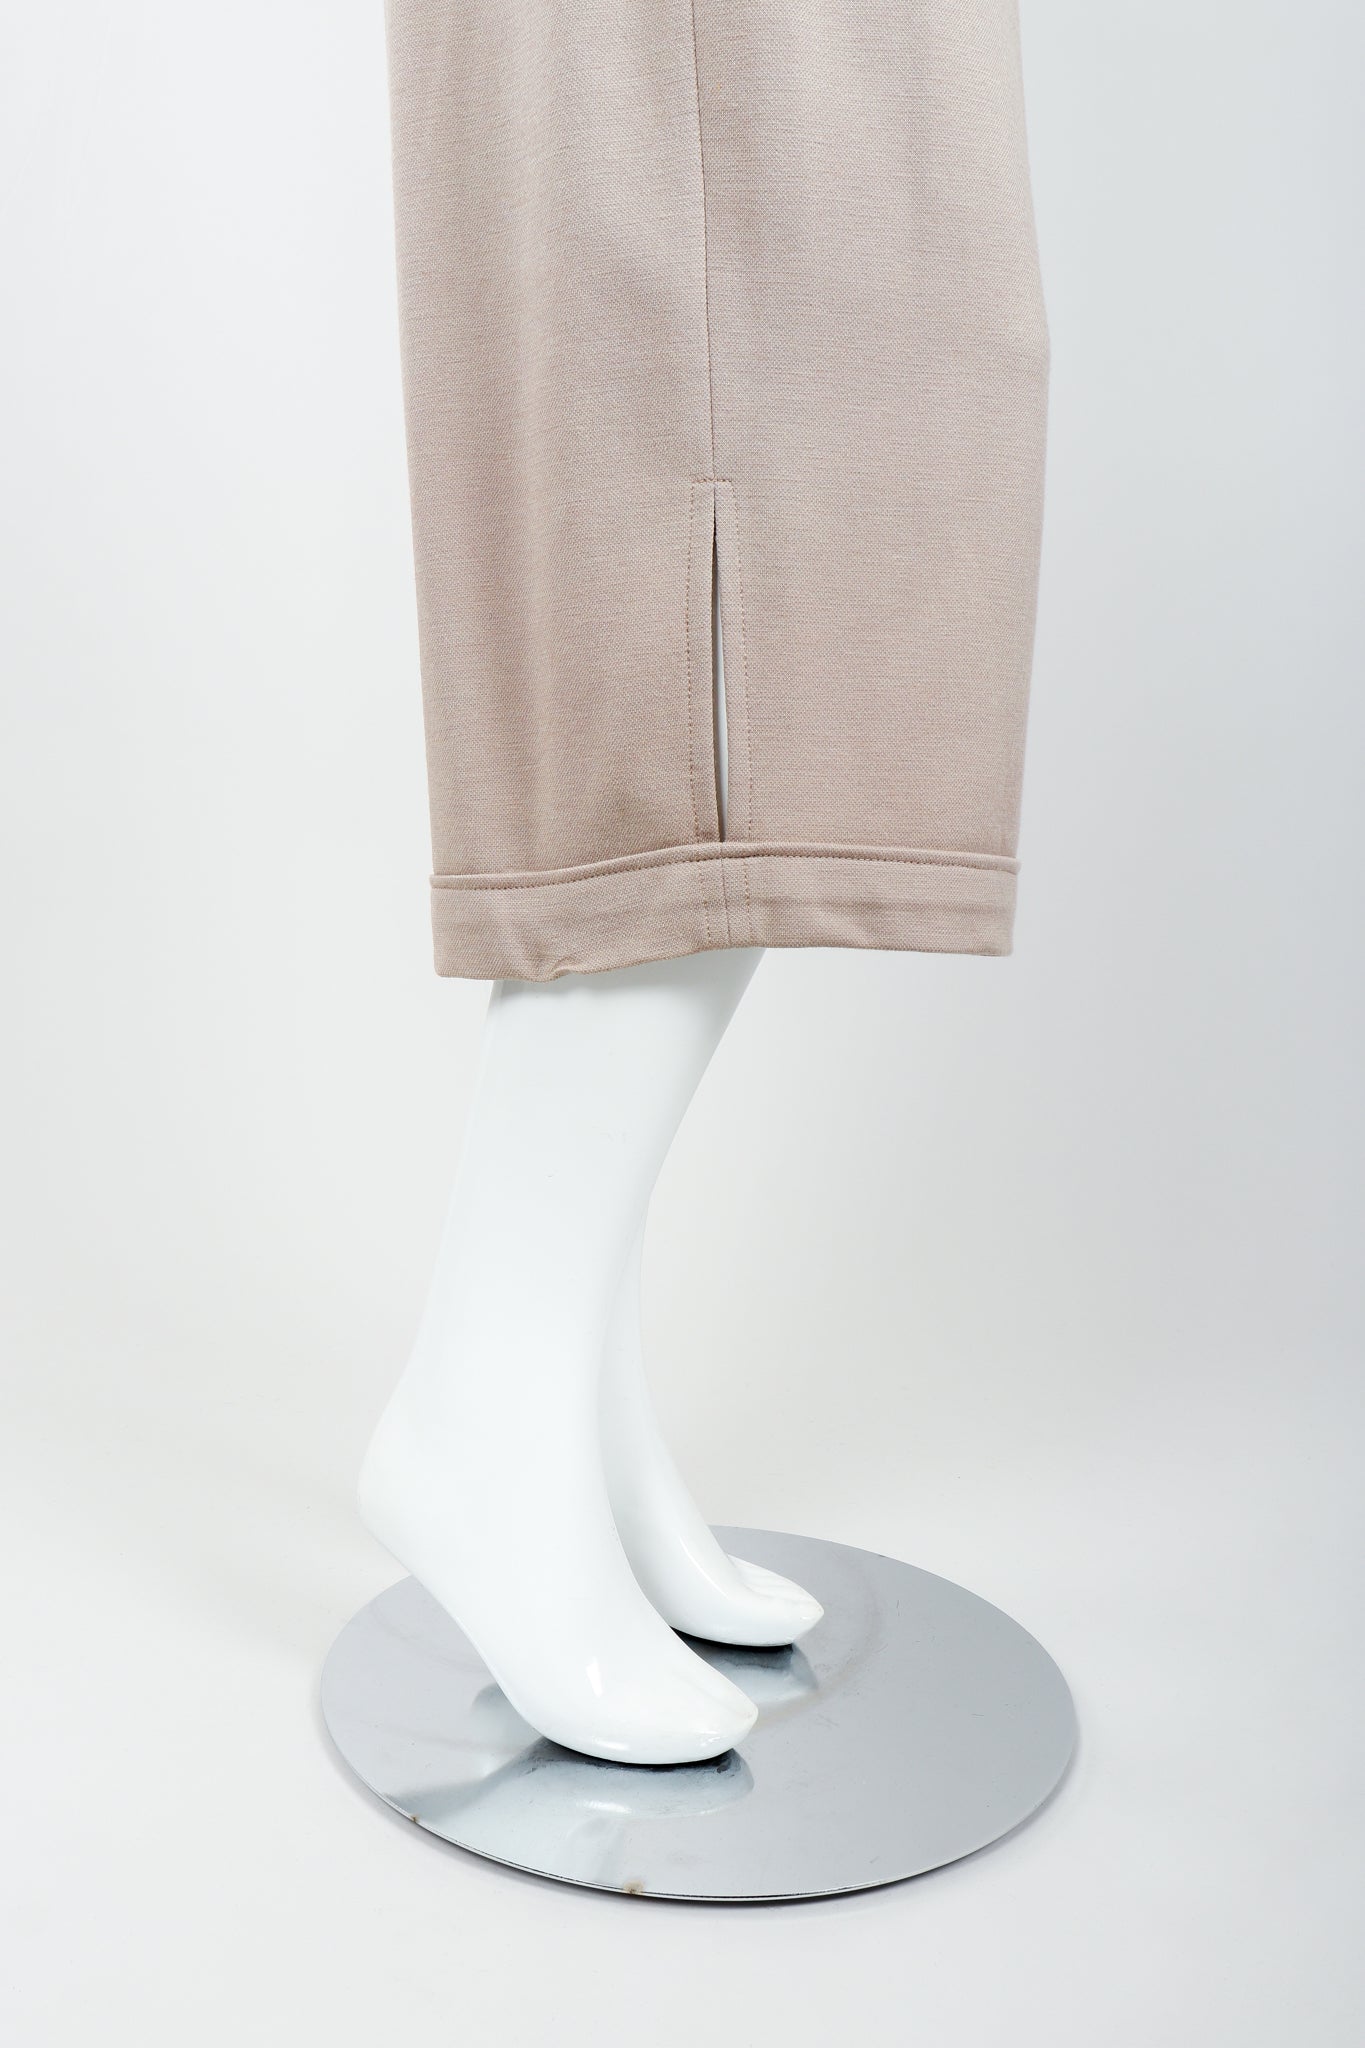 Vintage Sonia Rykiel Taupe Knit Cropped Trouser on Mannequin leg opening at Recess